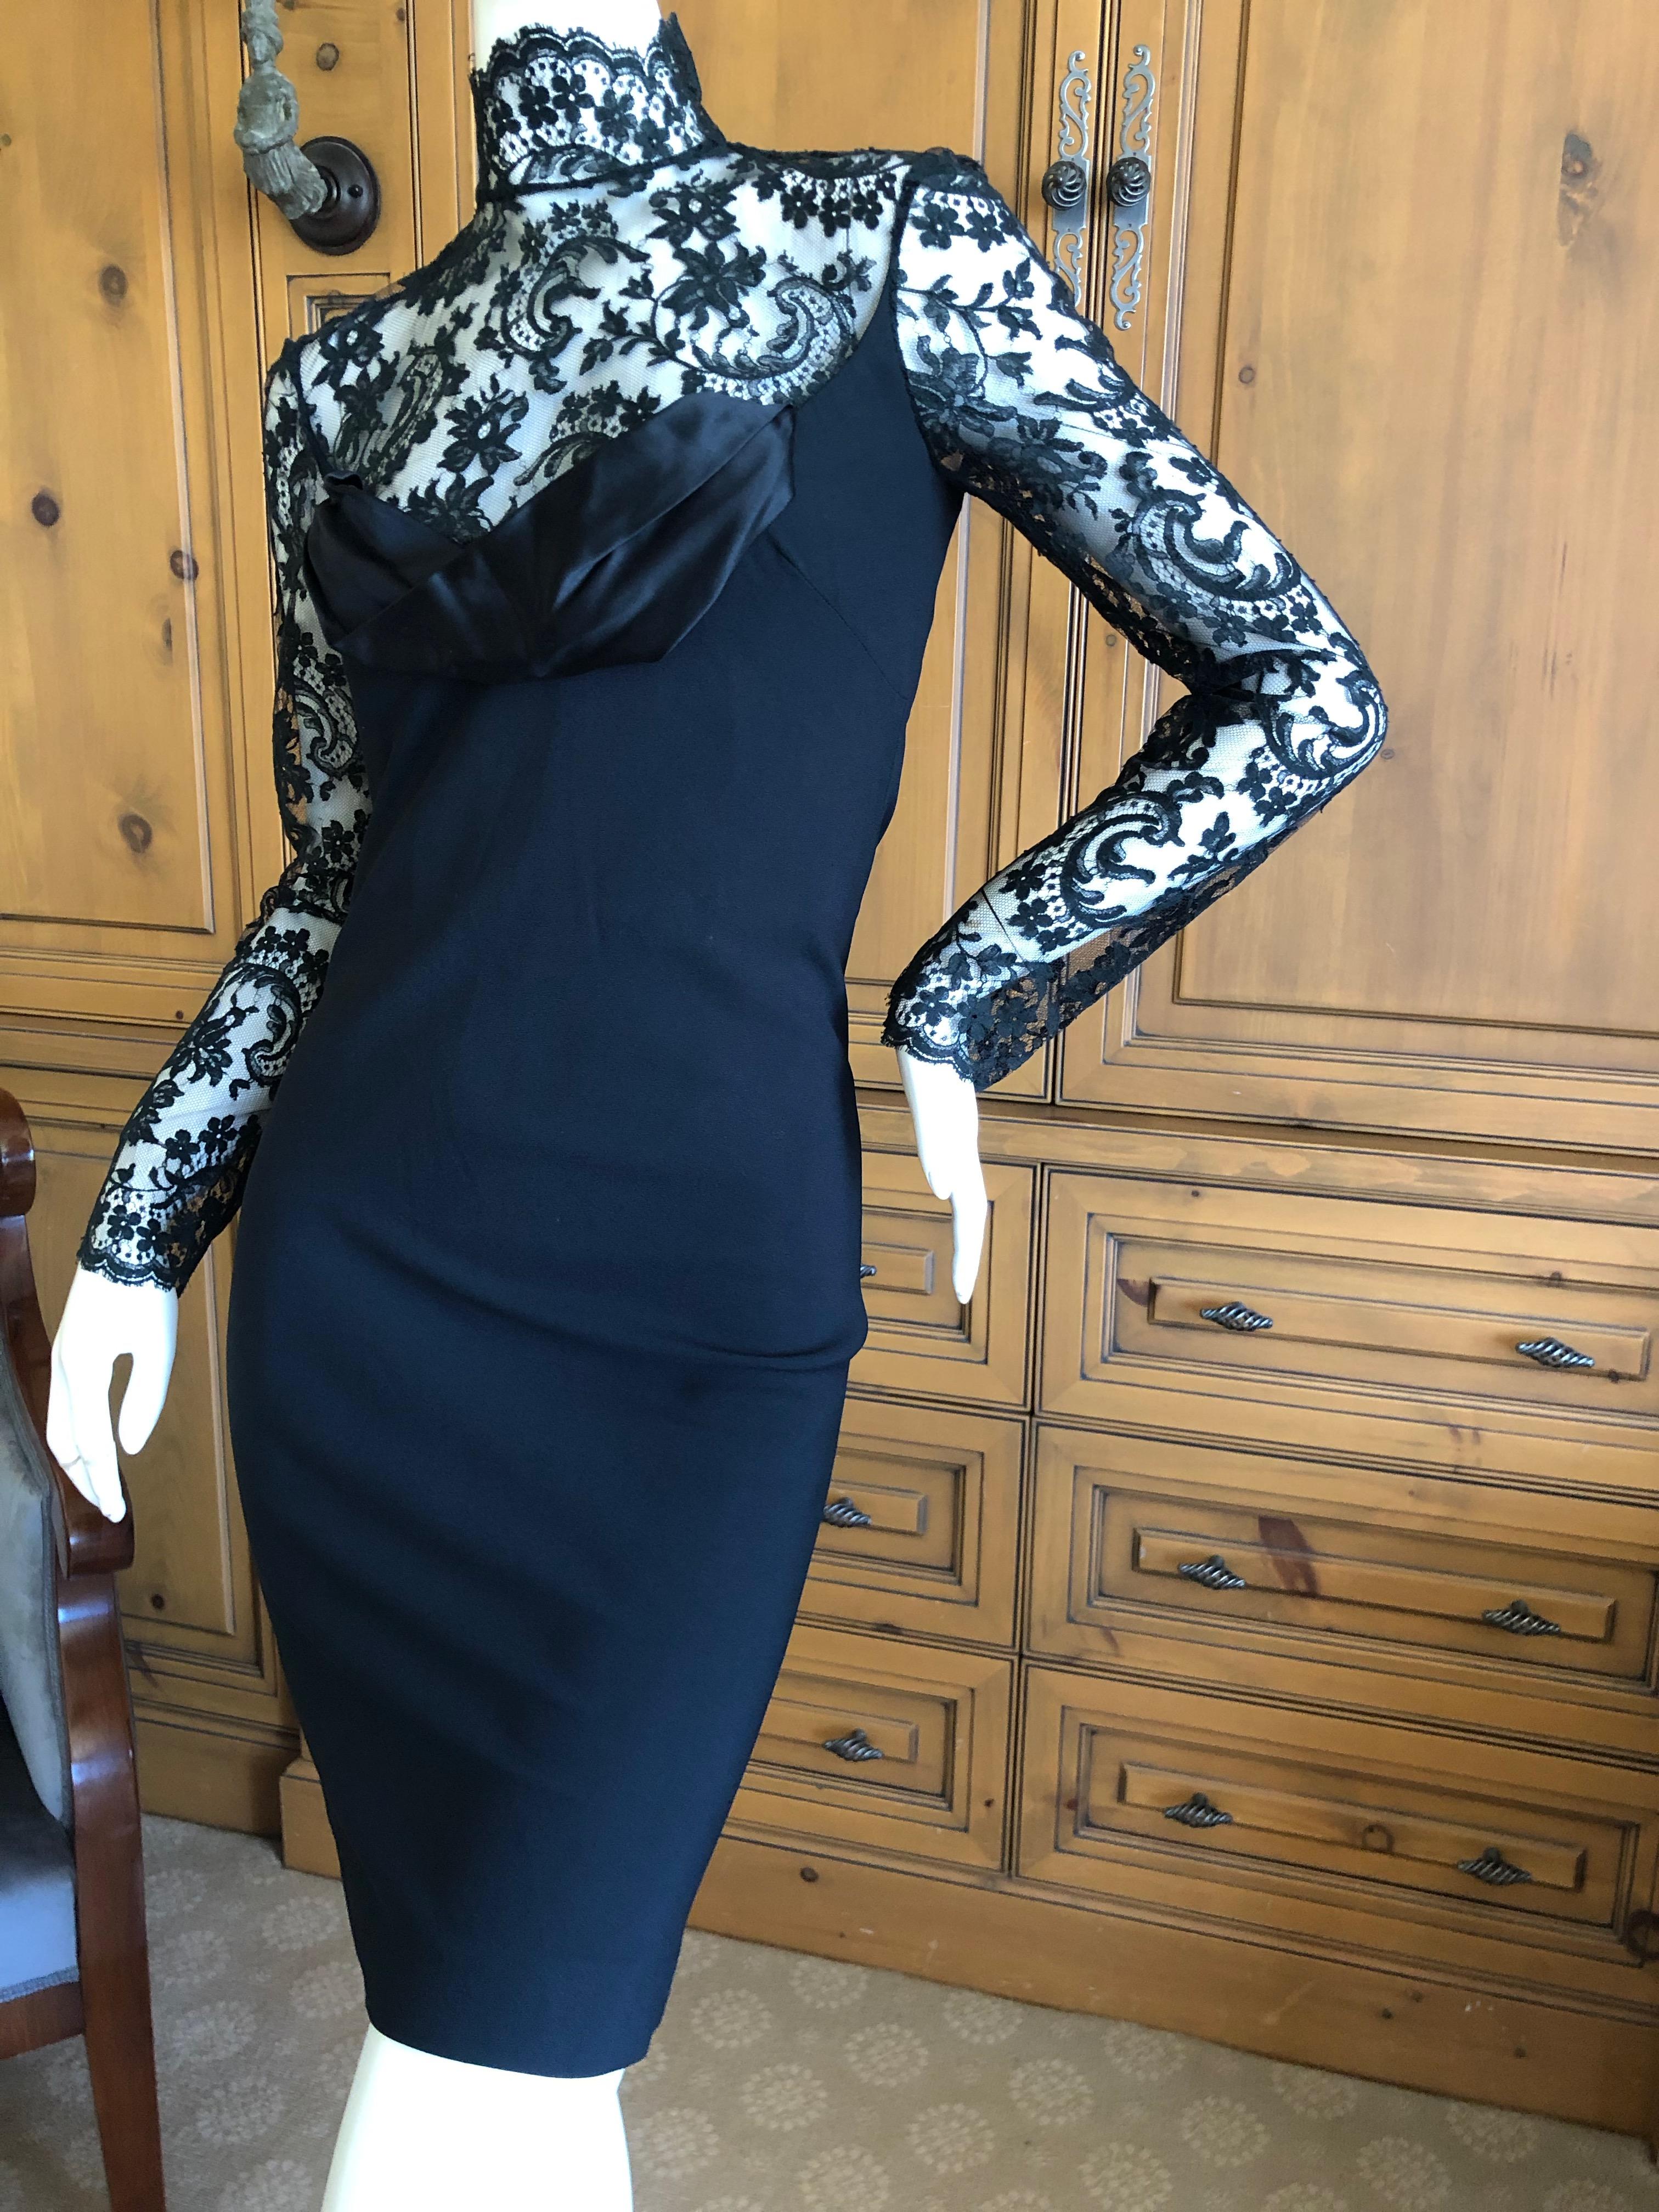 Givenchy Haute Couture by John Galliano Black Lace Cocktail Dress In Excellent Condition For Sale In Cloverdale, CA